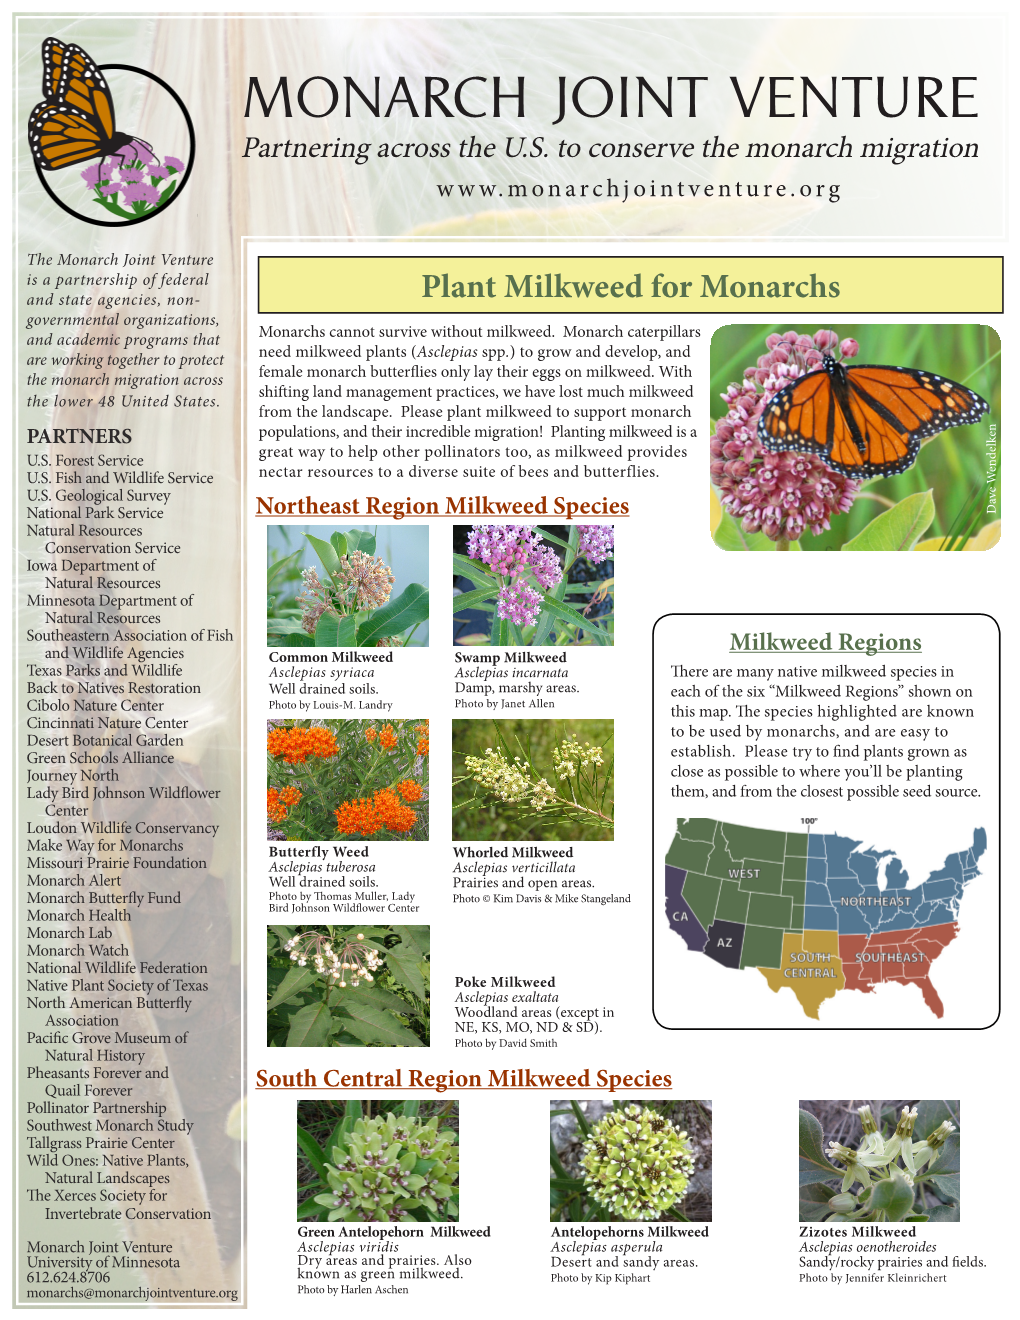 Native Milkweed Species in Back to Natives Restoration Well Drained Soils